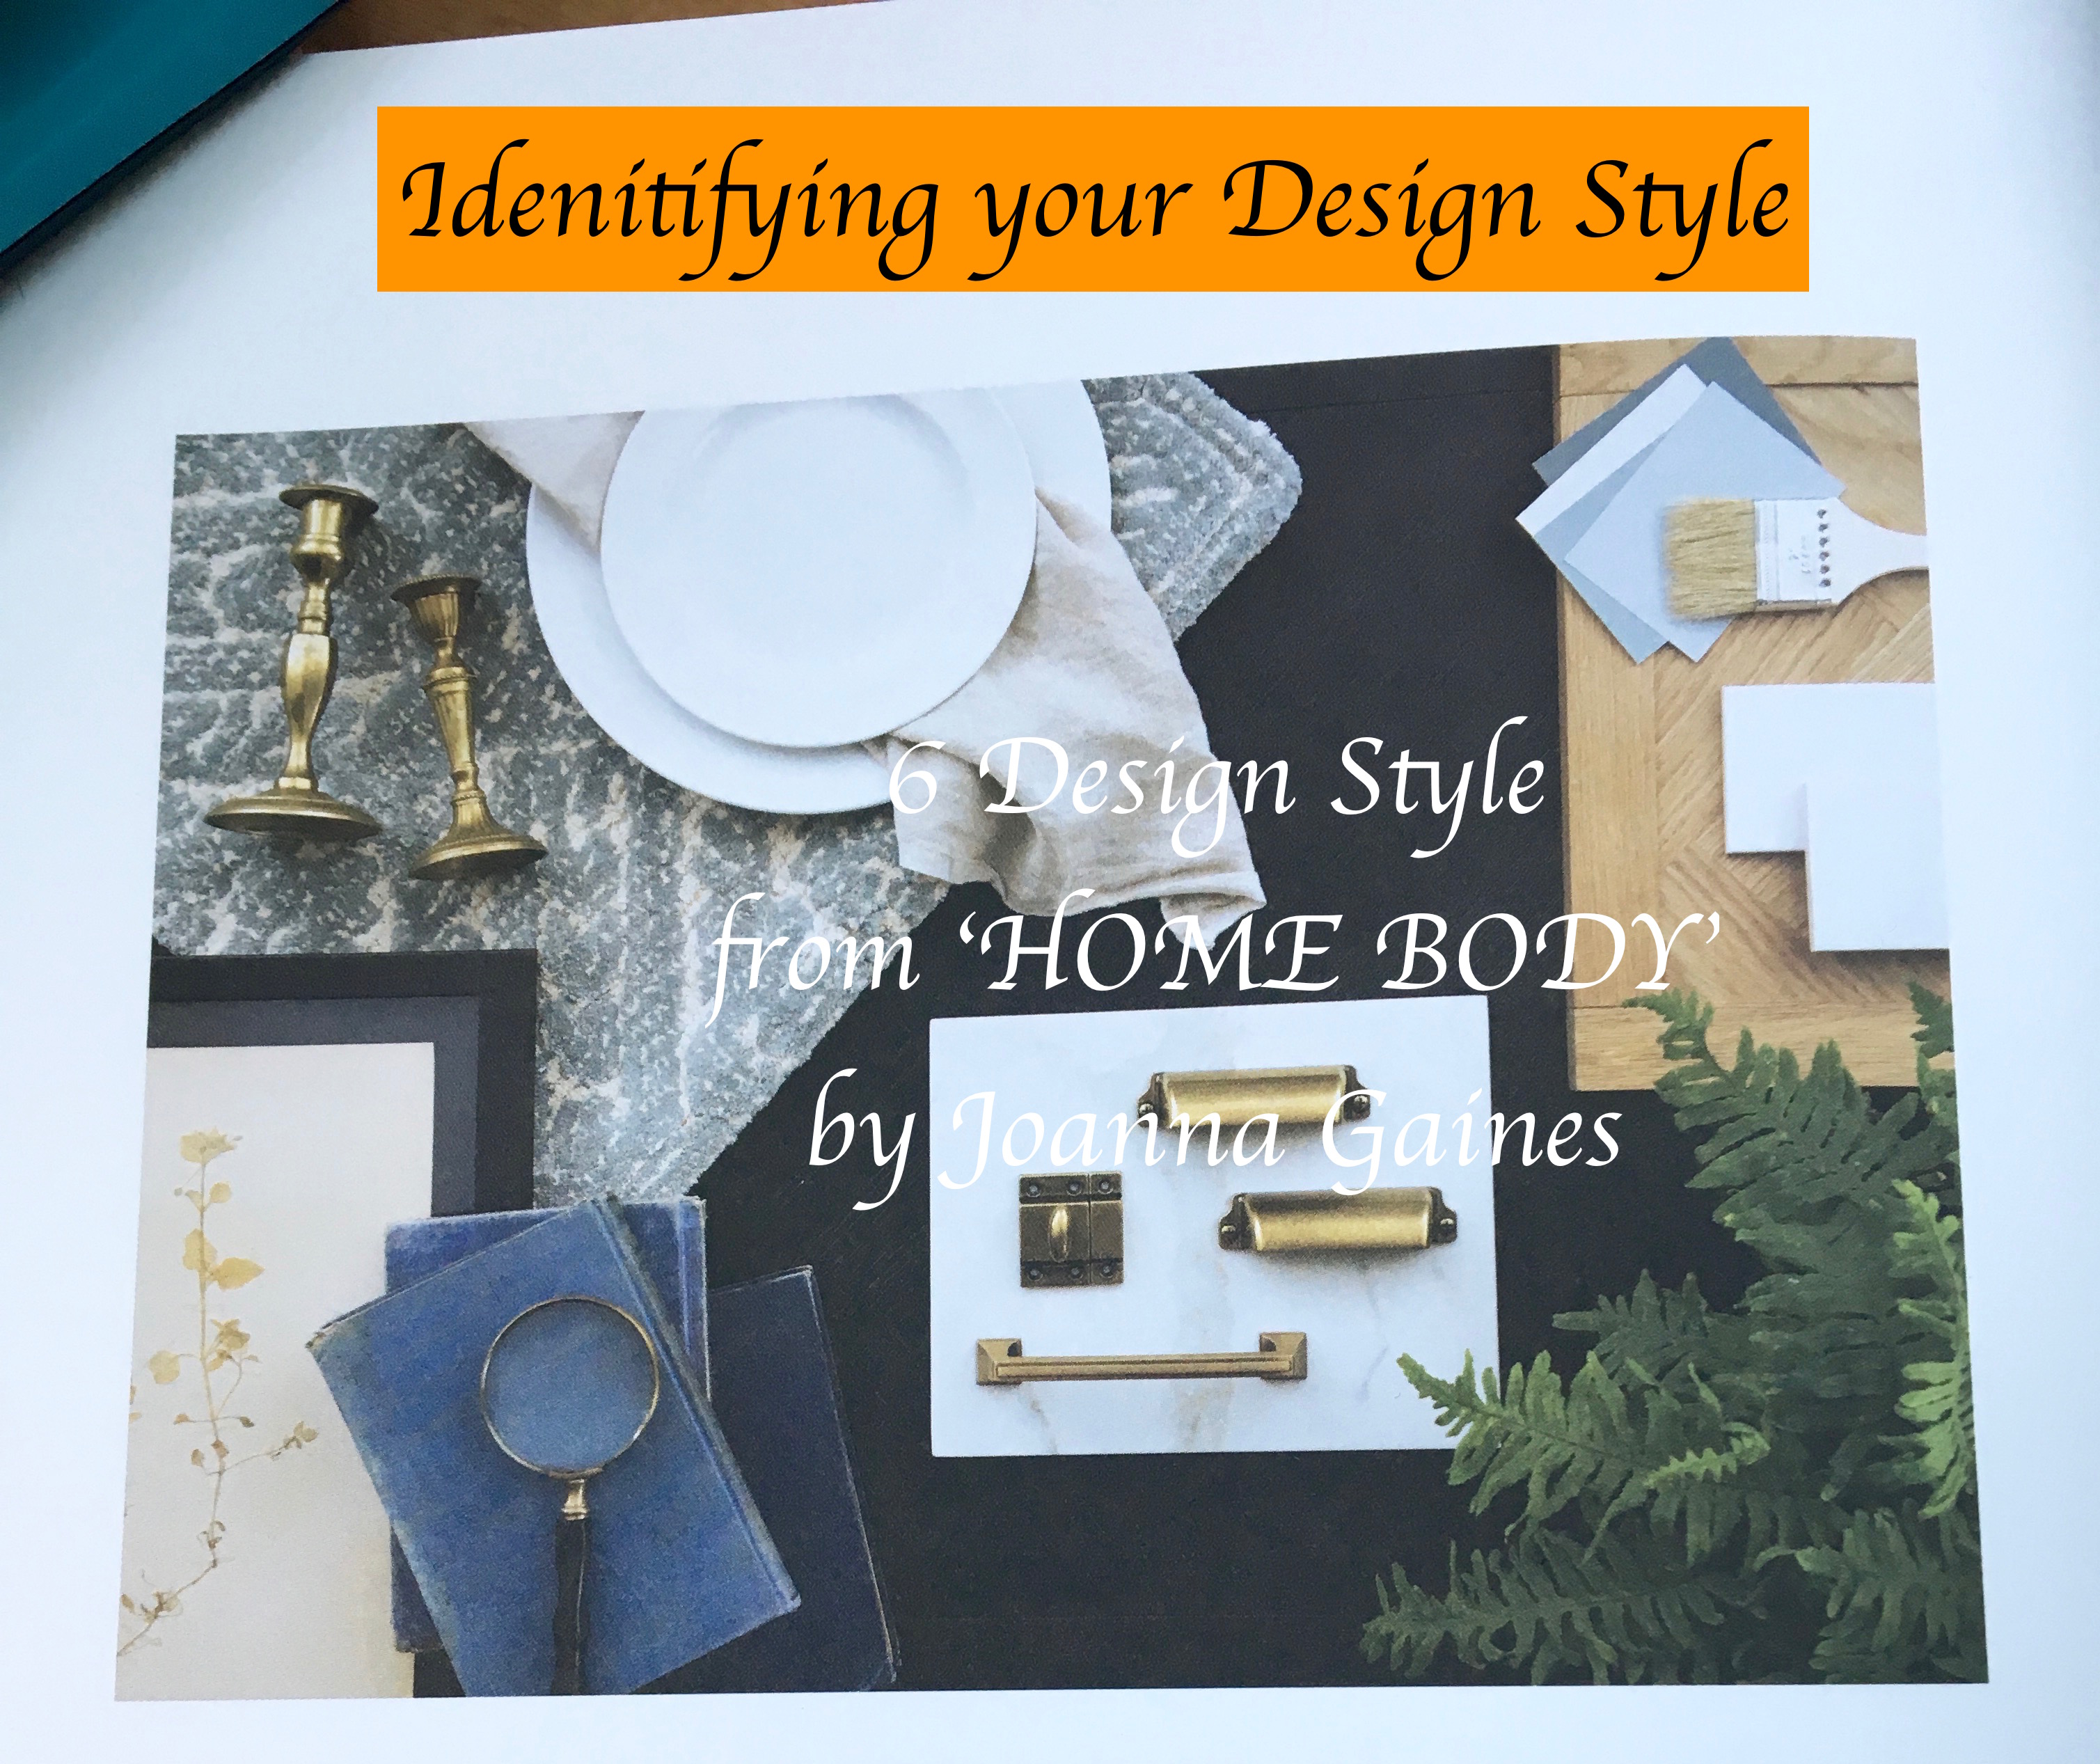 Identifying your Design Style